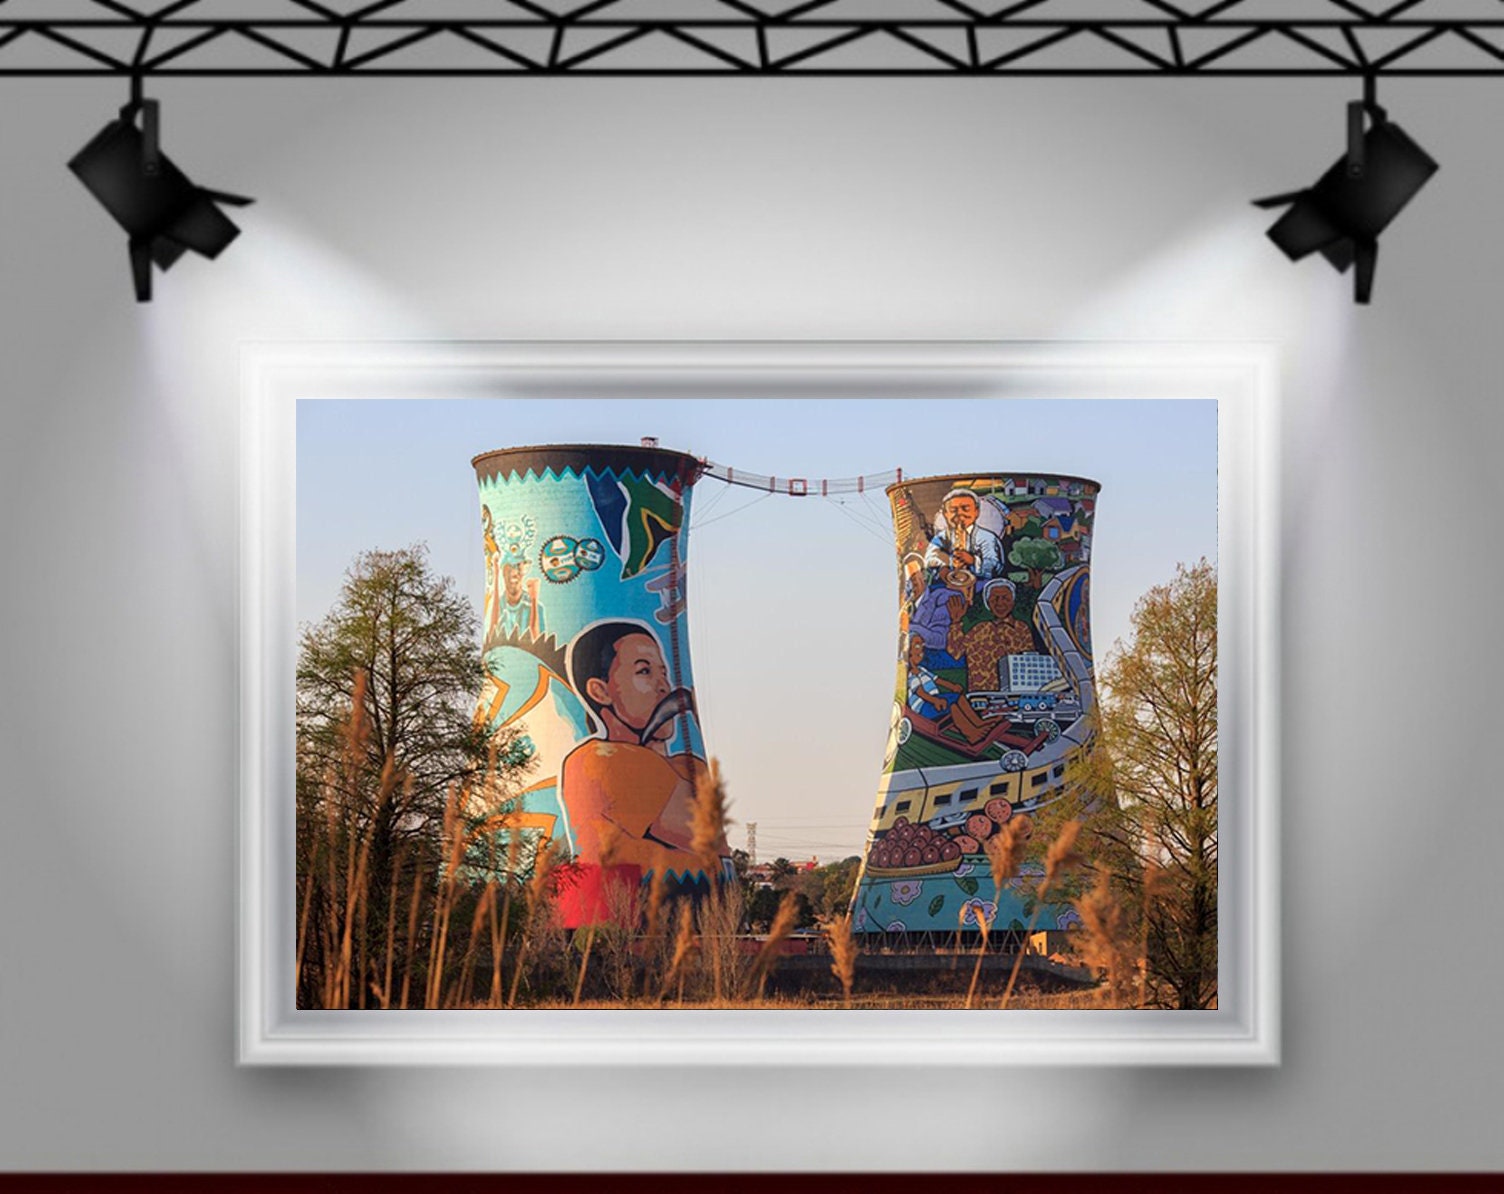 Soweto Johannesburg South Africa Orlando Towers Painted pic photo